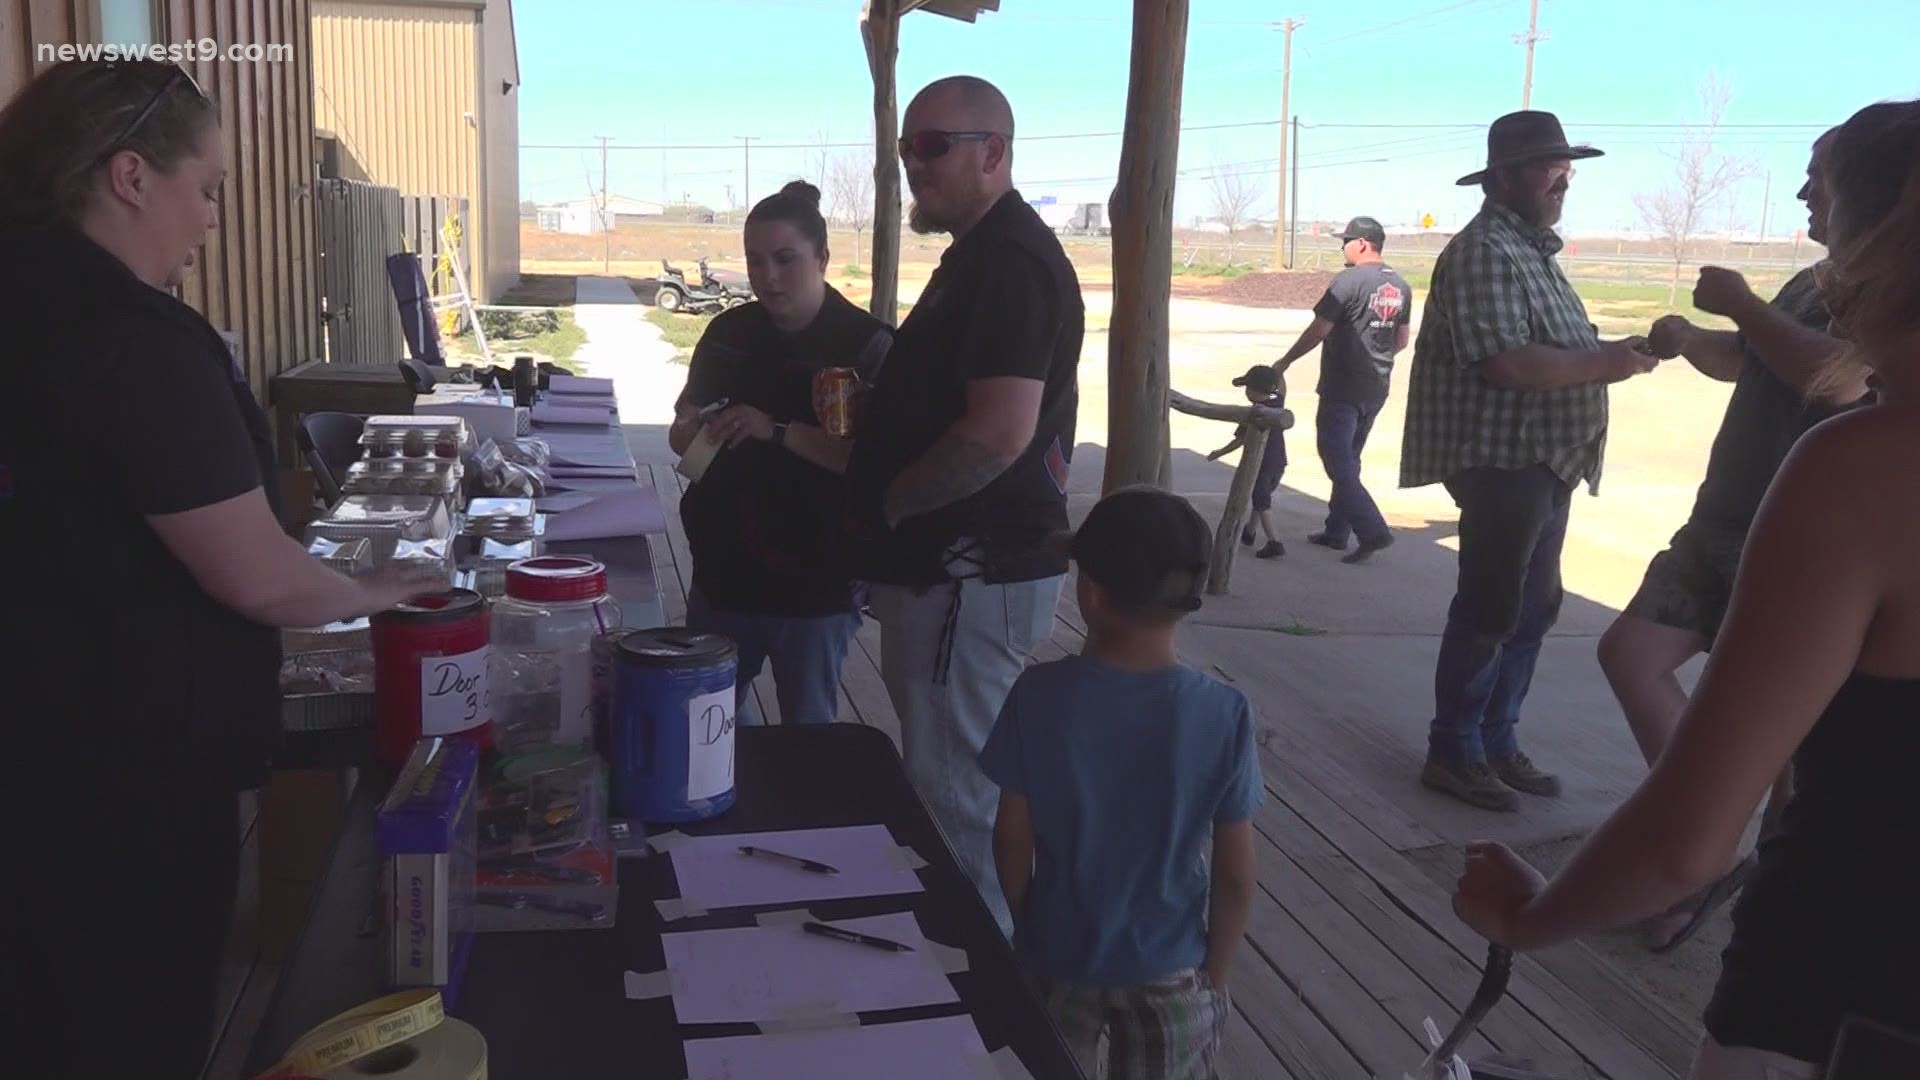 A Fish Fry and Bike Rodeo was held on Saturday to help Quentin and Courtney raise funds to complete the adoption process.